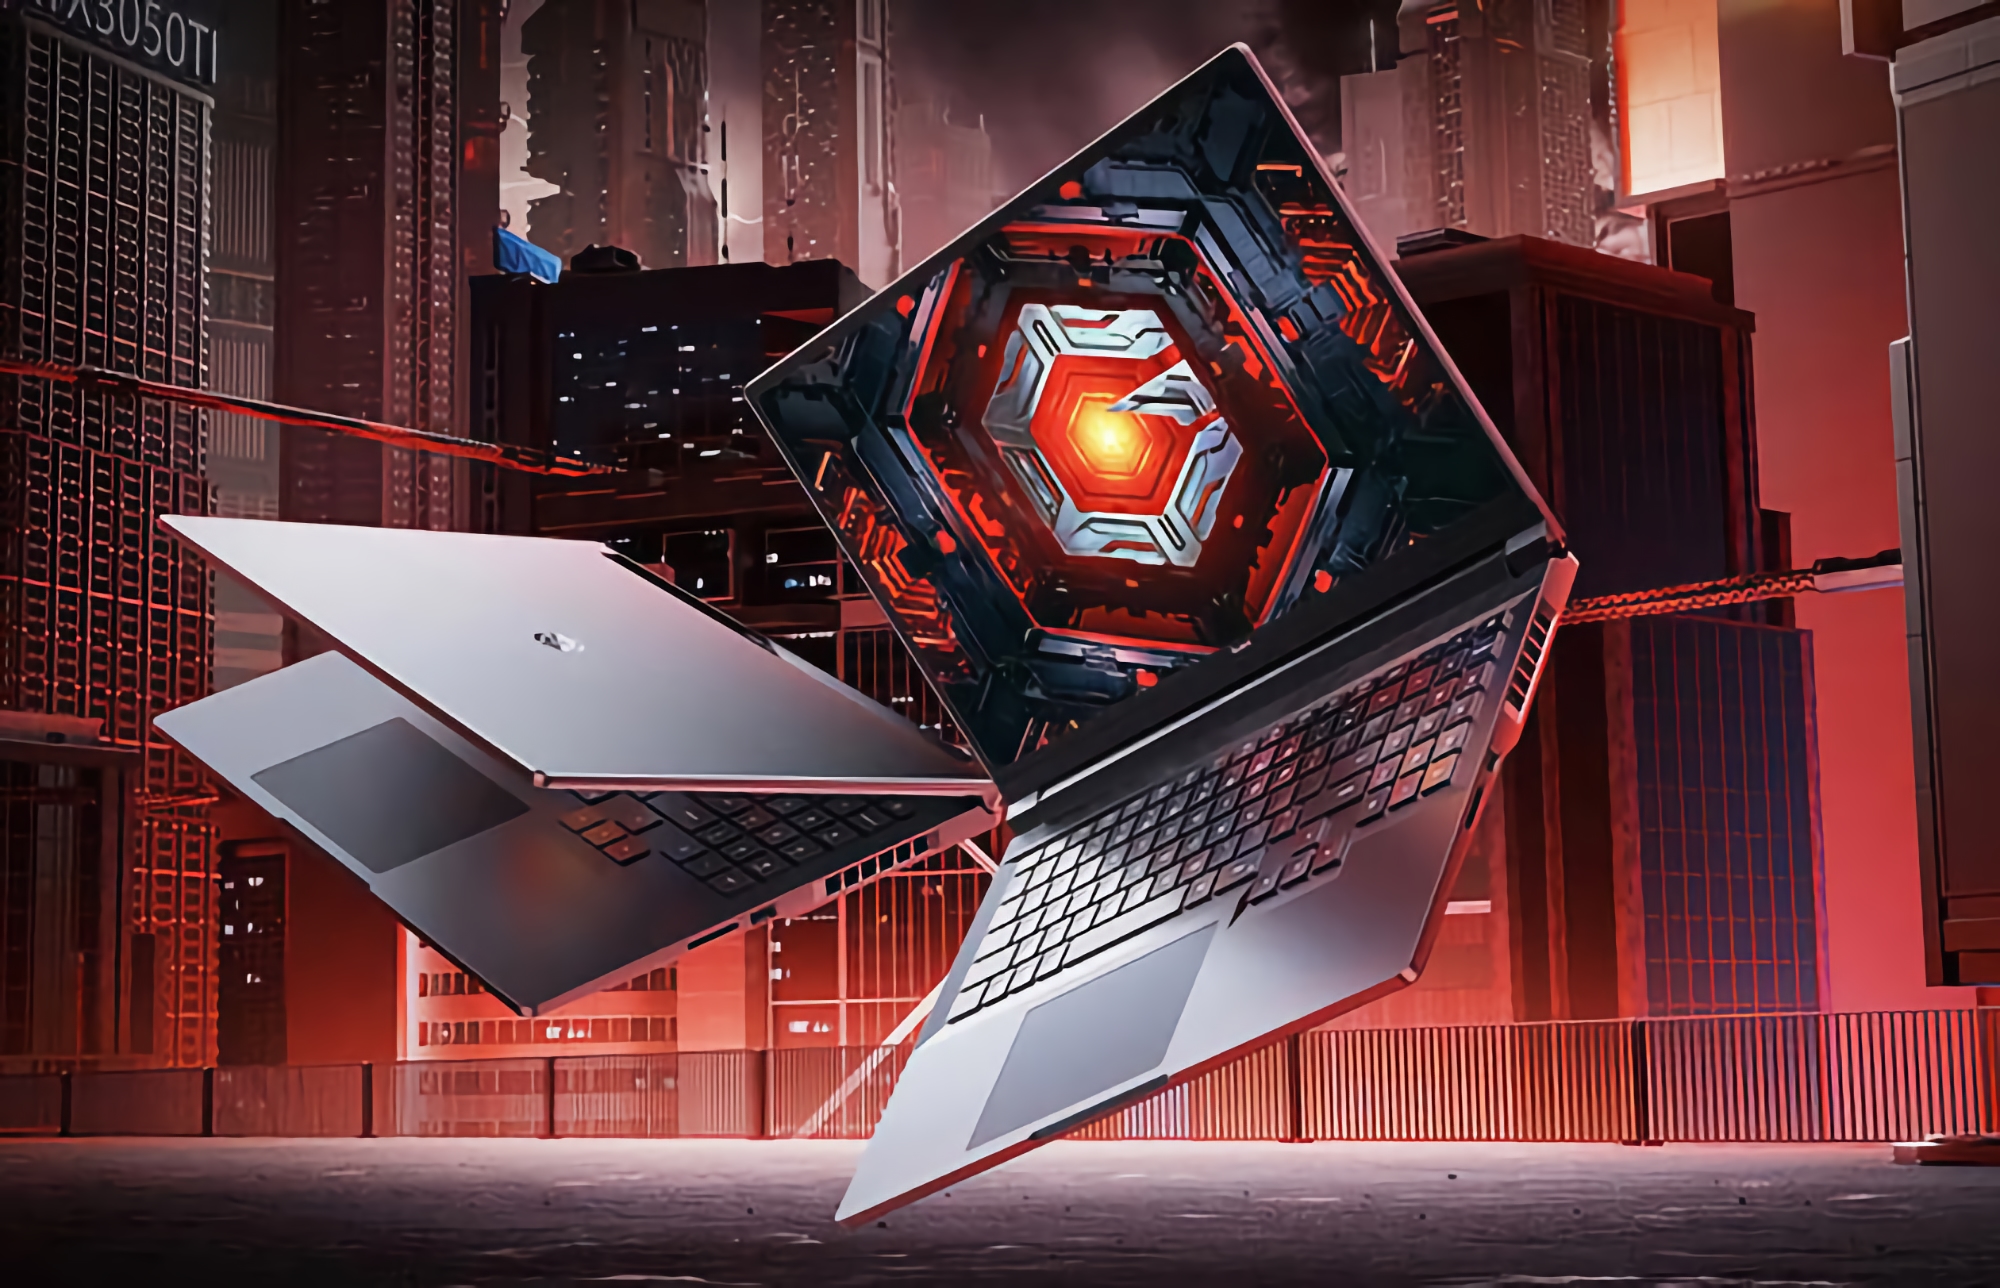 On September 7, Xiaomi will present the Redmi G Pro gaming laptop with an AMD Ryzen 7 6800H processor and Nvidia GeForce RTX 3060 graphics